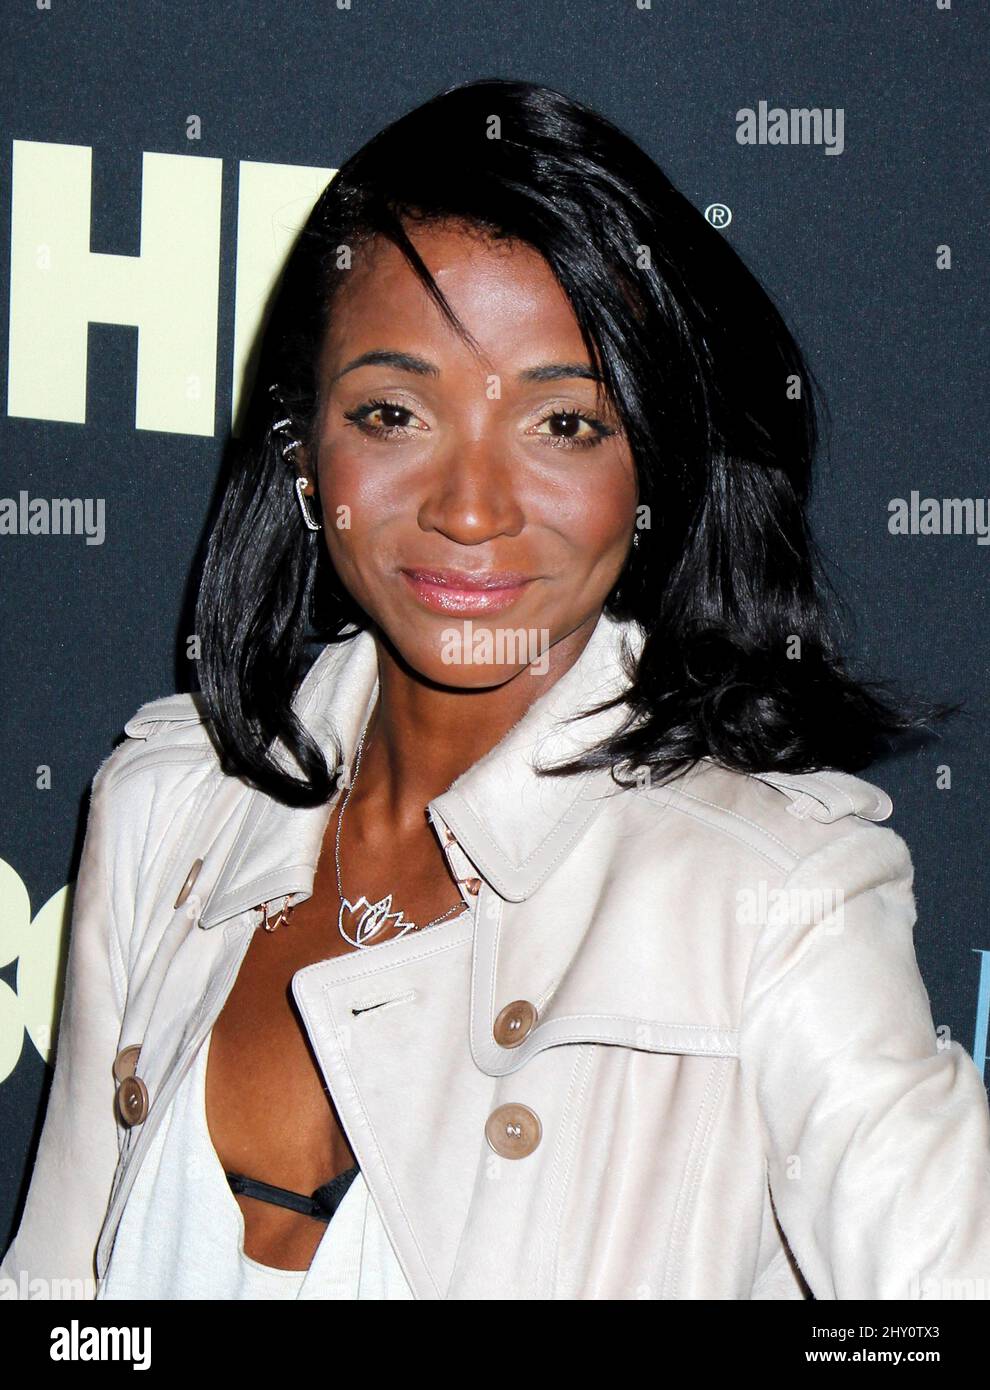 Genevieve Jones attending the Beyonce 'Life Is But A Dream' screening held at the Ziegfeld Theater in New York, USA. Stock Photo